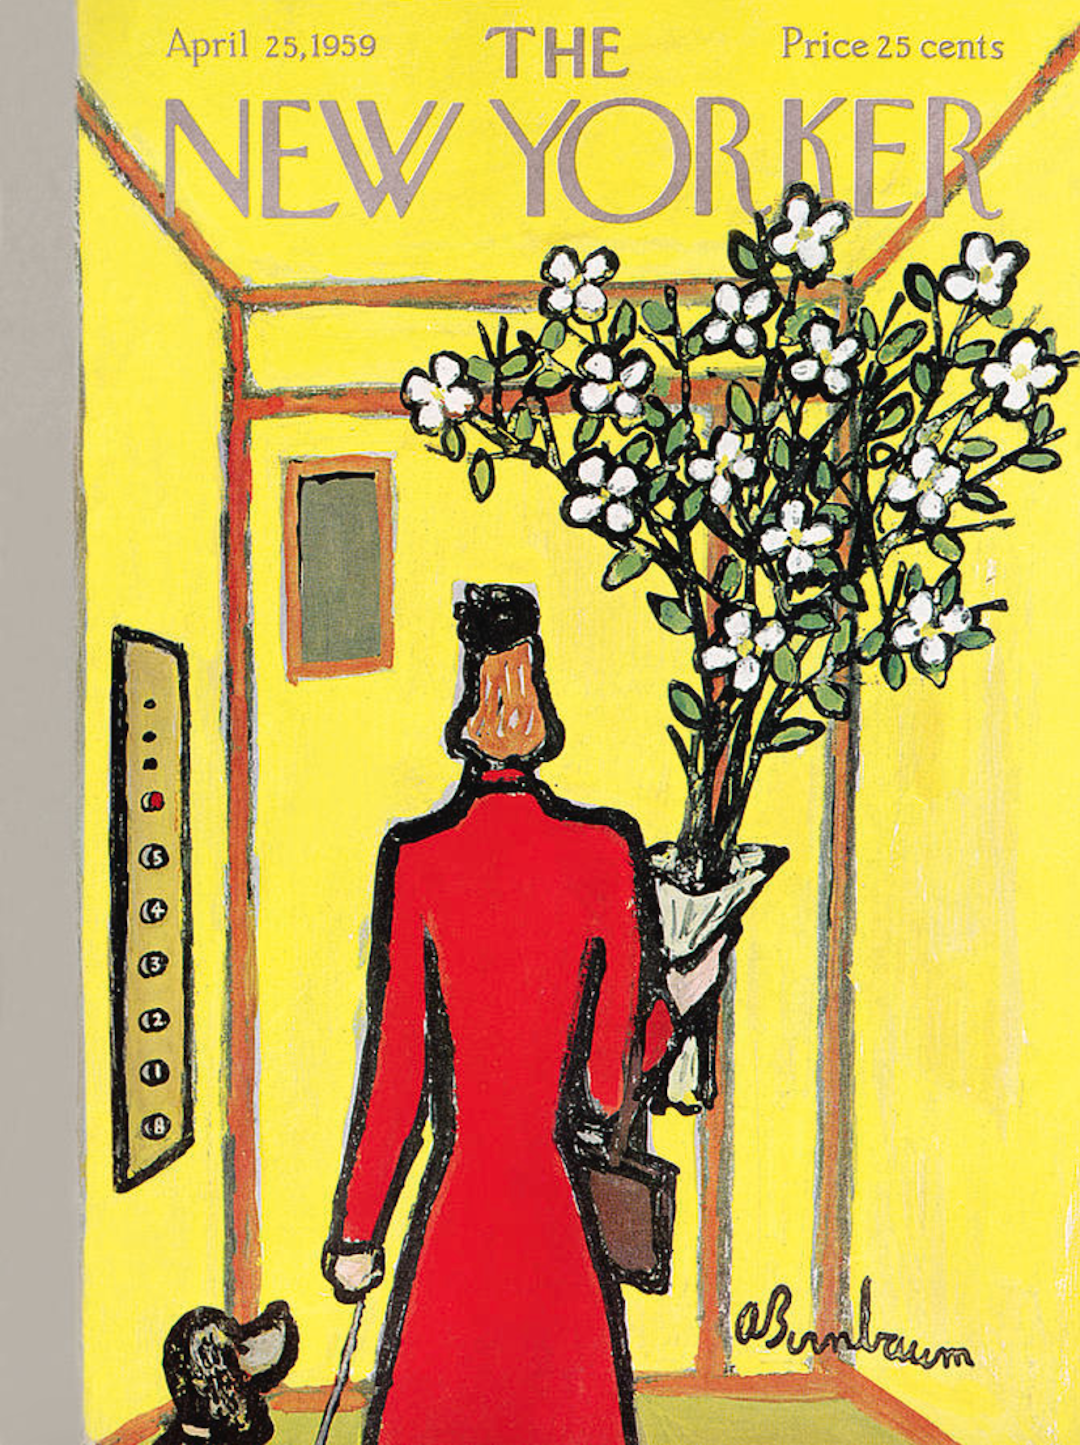 Old New Yorker Covers That Still Look Strikingly Modern